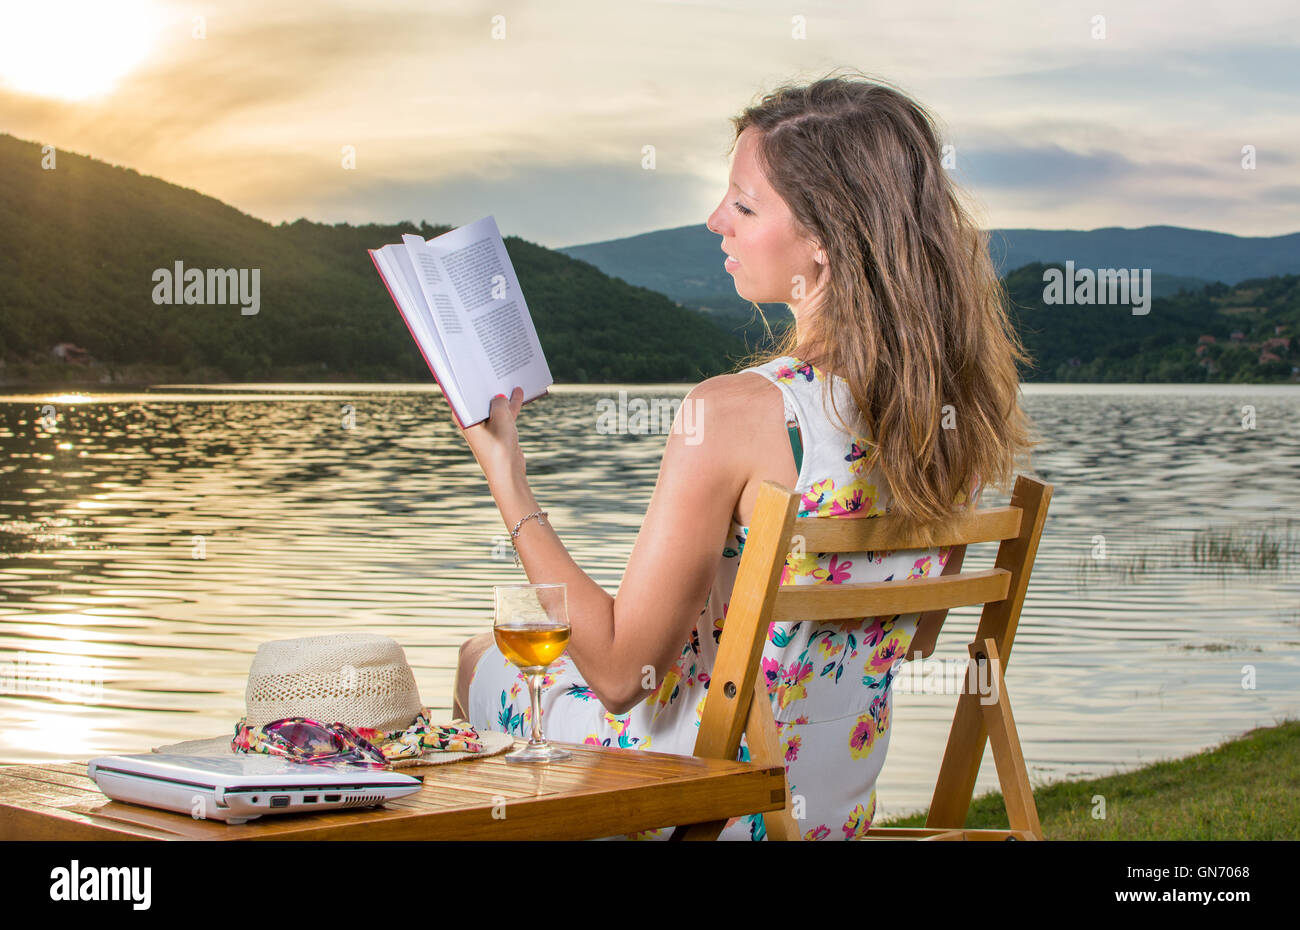 Young woman reading a book by the lake Stock Photo